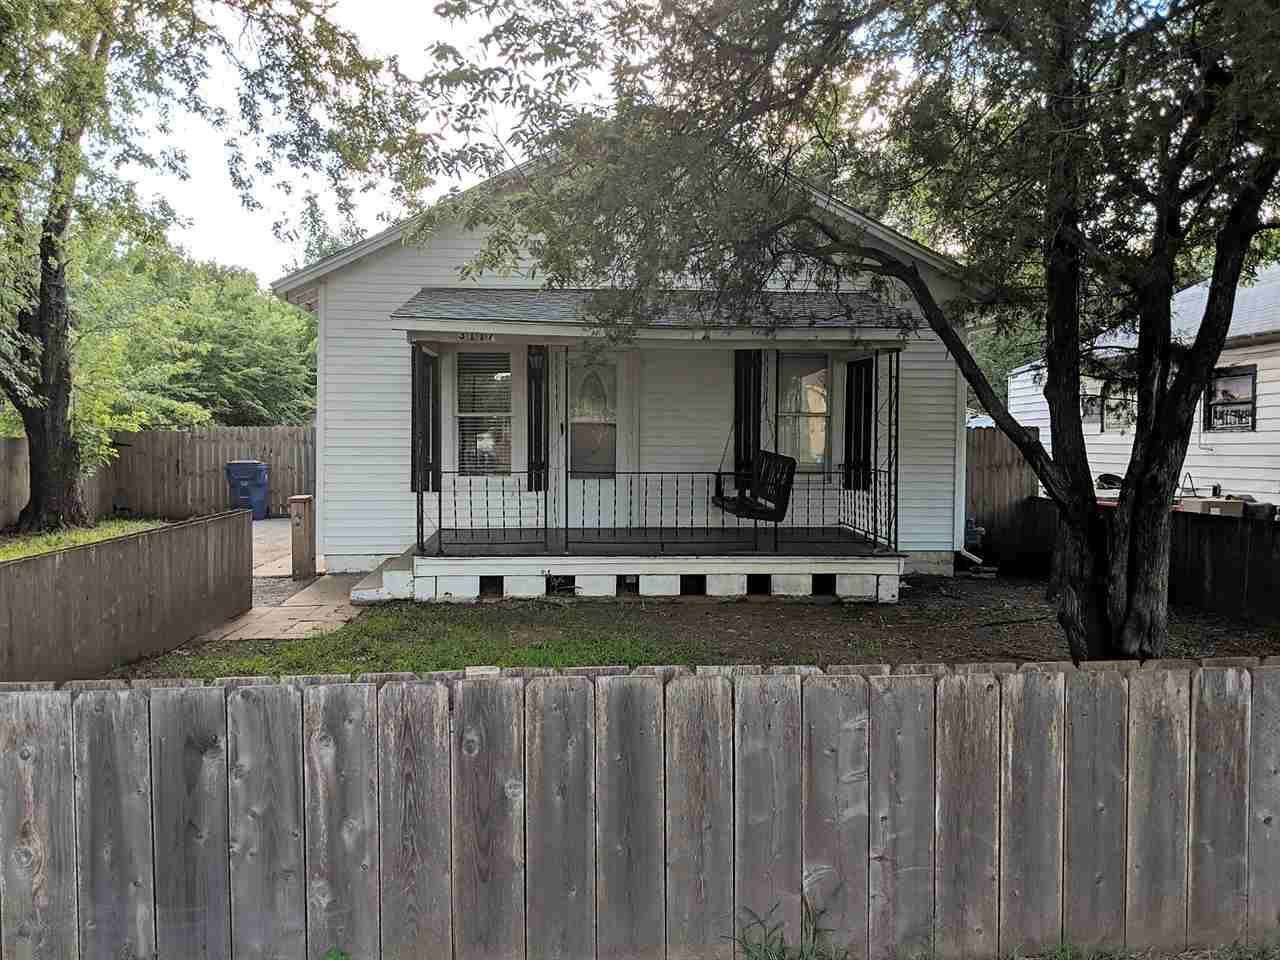 Cute Little 2 Bedroom Bungalow with Fenced yard, Over-sized 2 Car Garage, Unfinished Basement, Covered Front Porch w/ Swing :) Hardwood floors, new Storm Door, Newer Plumbing and More :)